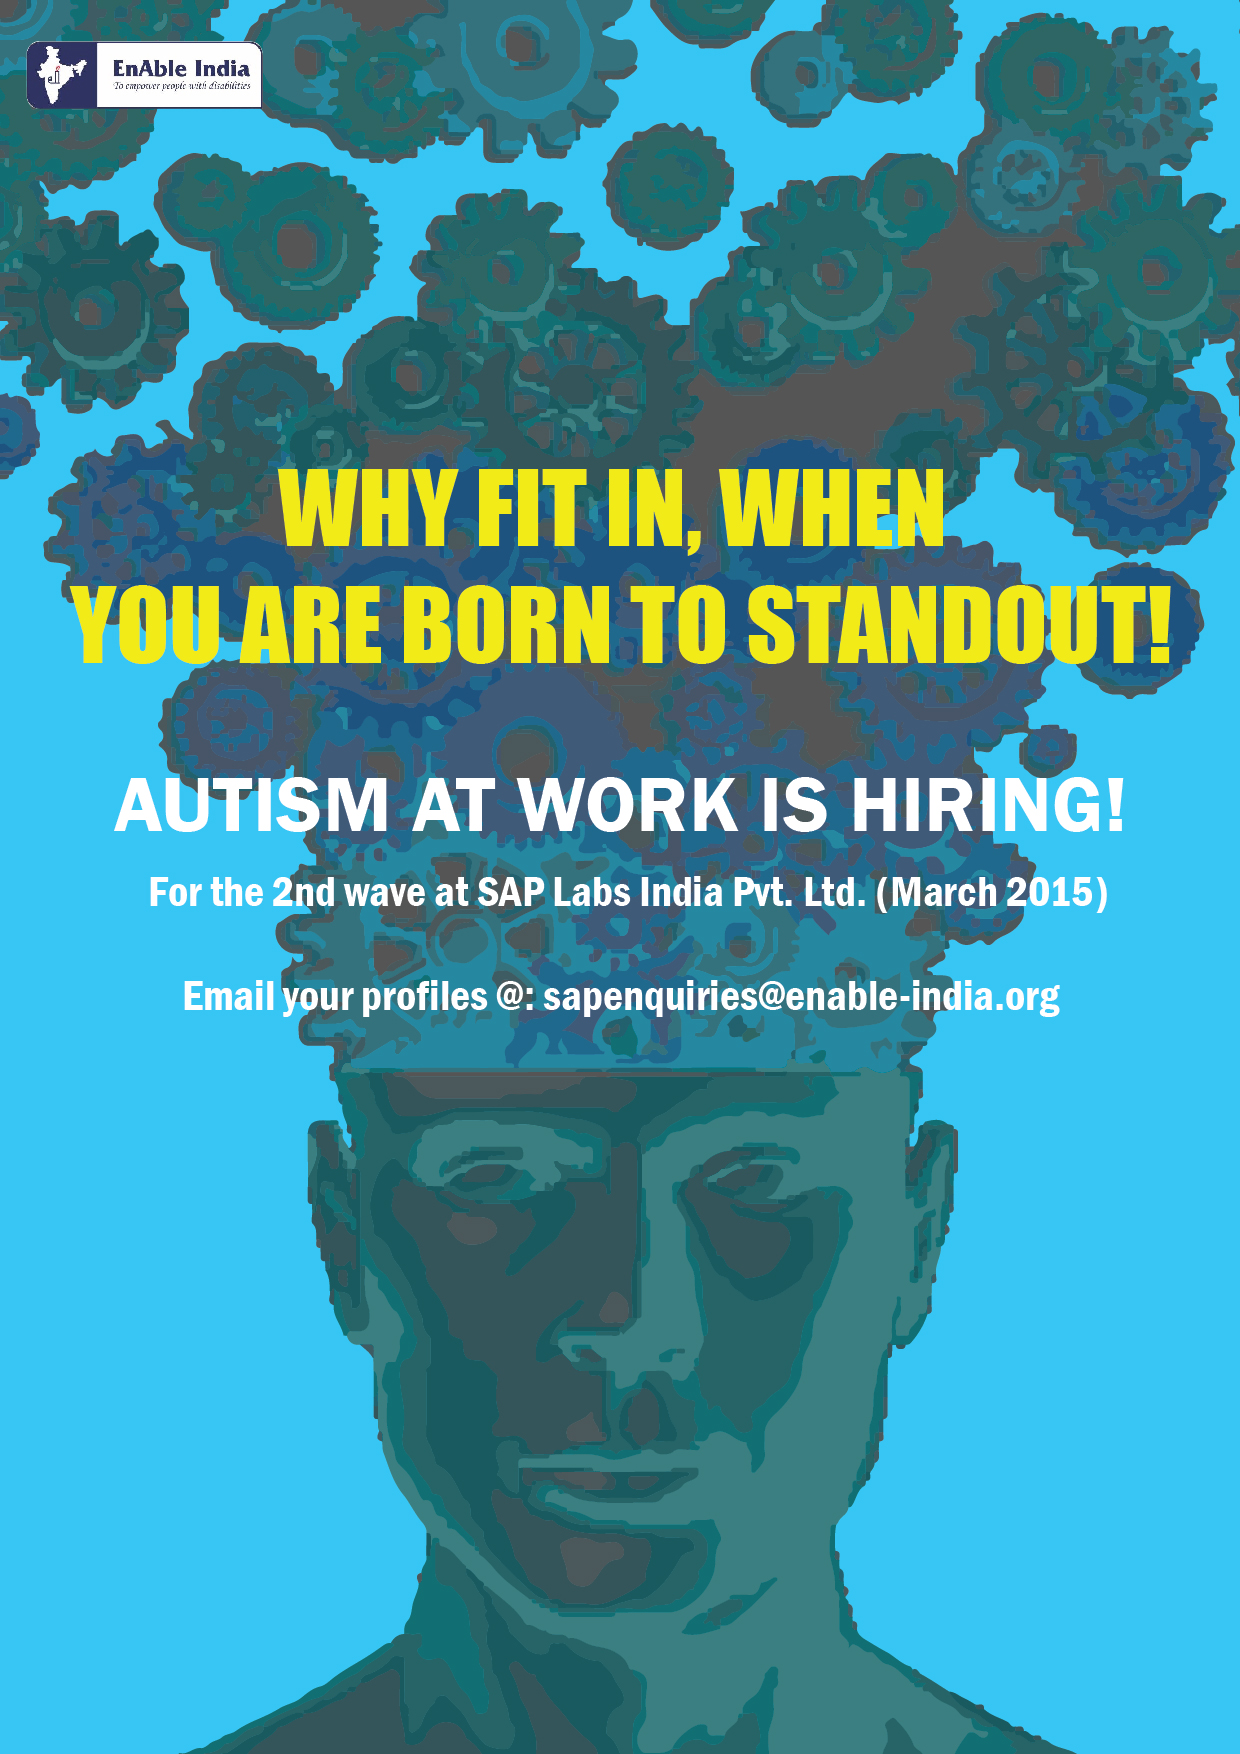 SAP in India are hiring candidates with Autism